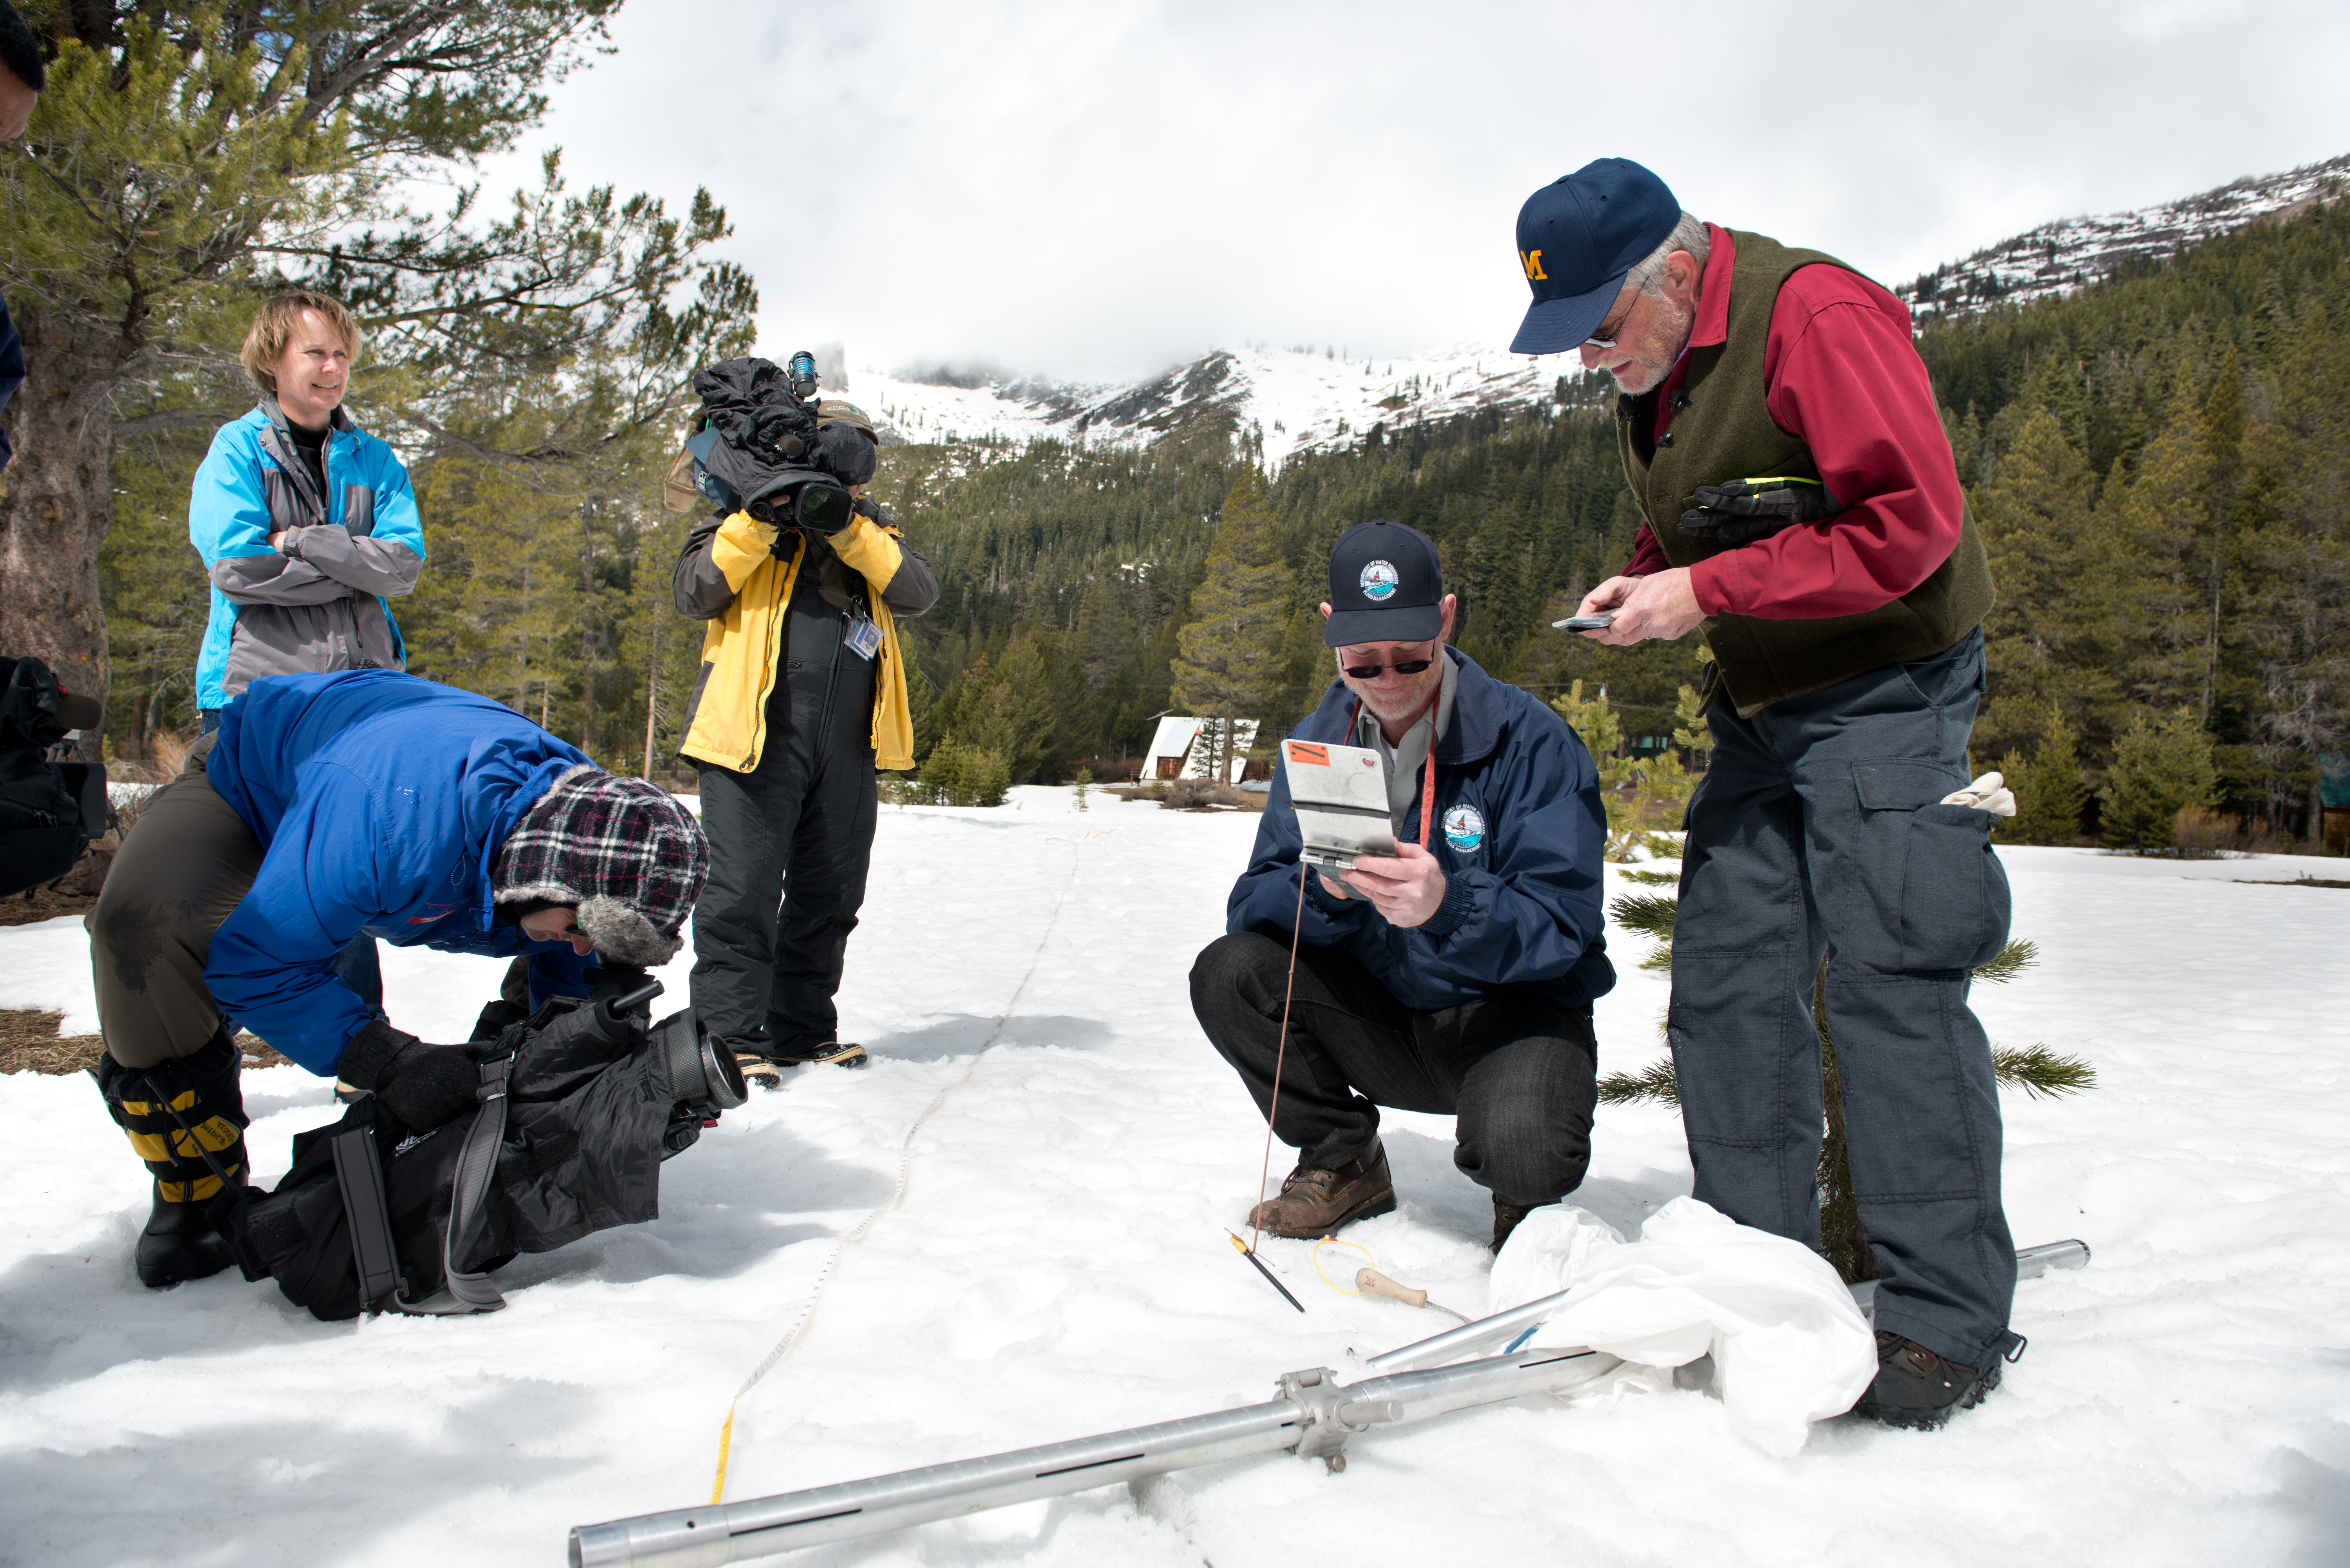 This photo from March 2013 shows Keith Swanson (DWR Chief of Division of Flood Management) and Frank Gehrke (DWR Chief of Snow Surveys) conduct the annual snow survey at Phillips Station. This year, the location had no visible snow covering the ground. (Photo courtesy Gov. Jerry Brown's Office)